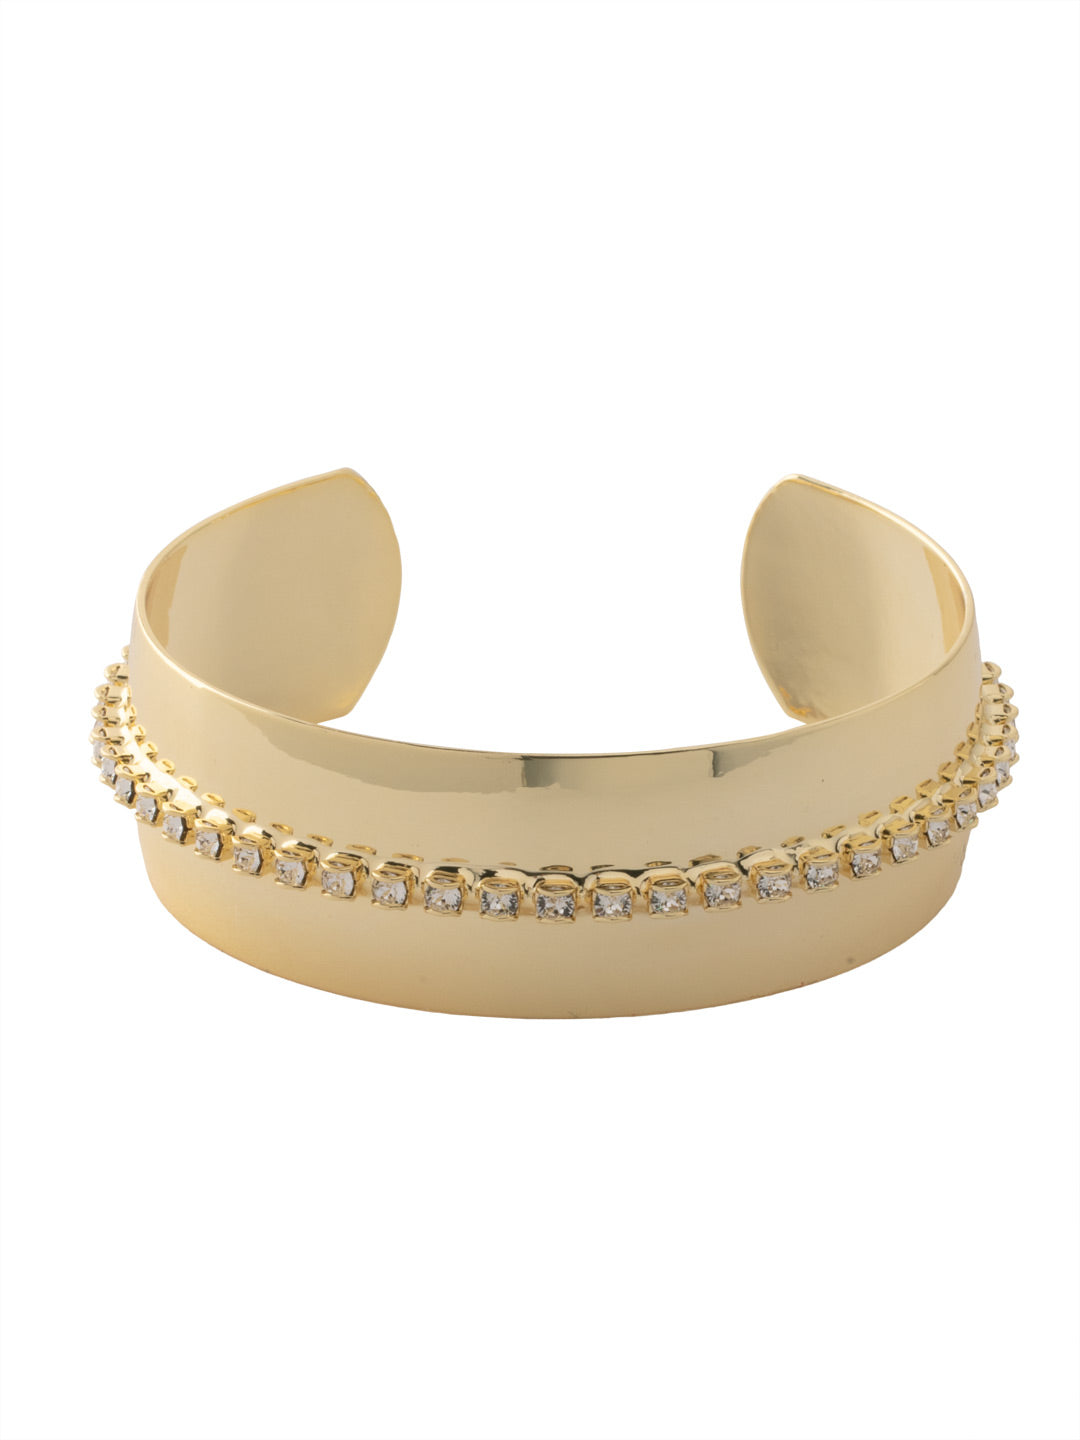 Embellished Cuff Bracelet - BFK3BGCRY - <p>The Embellished Cuff Bracelet features a domed band cuff embellished with a line of clear crystals. From Sorrelli's Crystal collection in our Bright Gold-tone finish.</p>